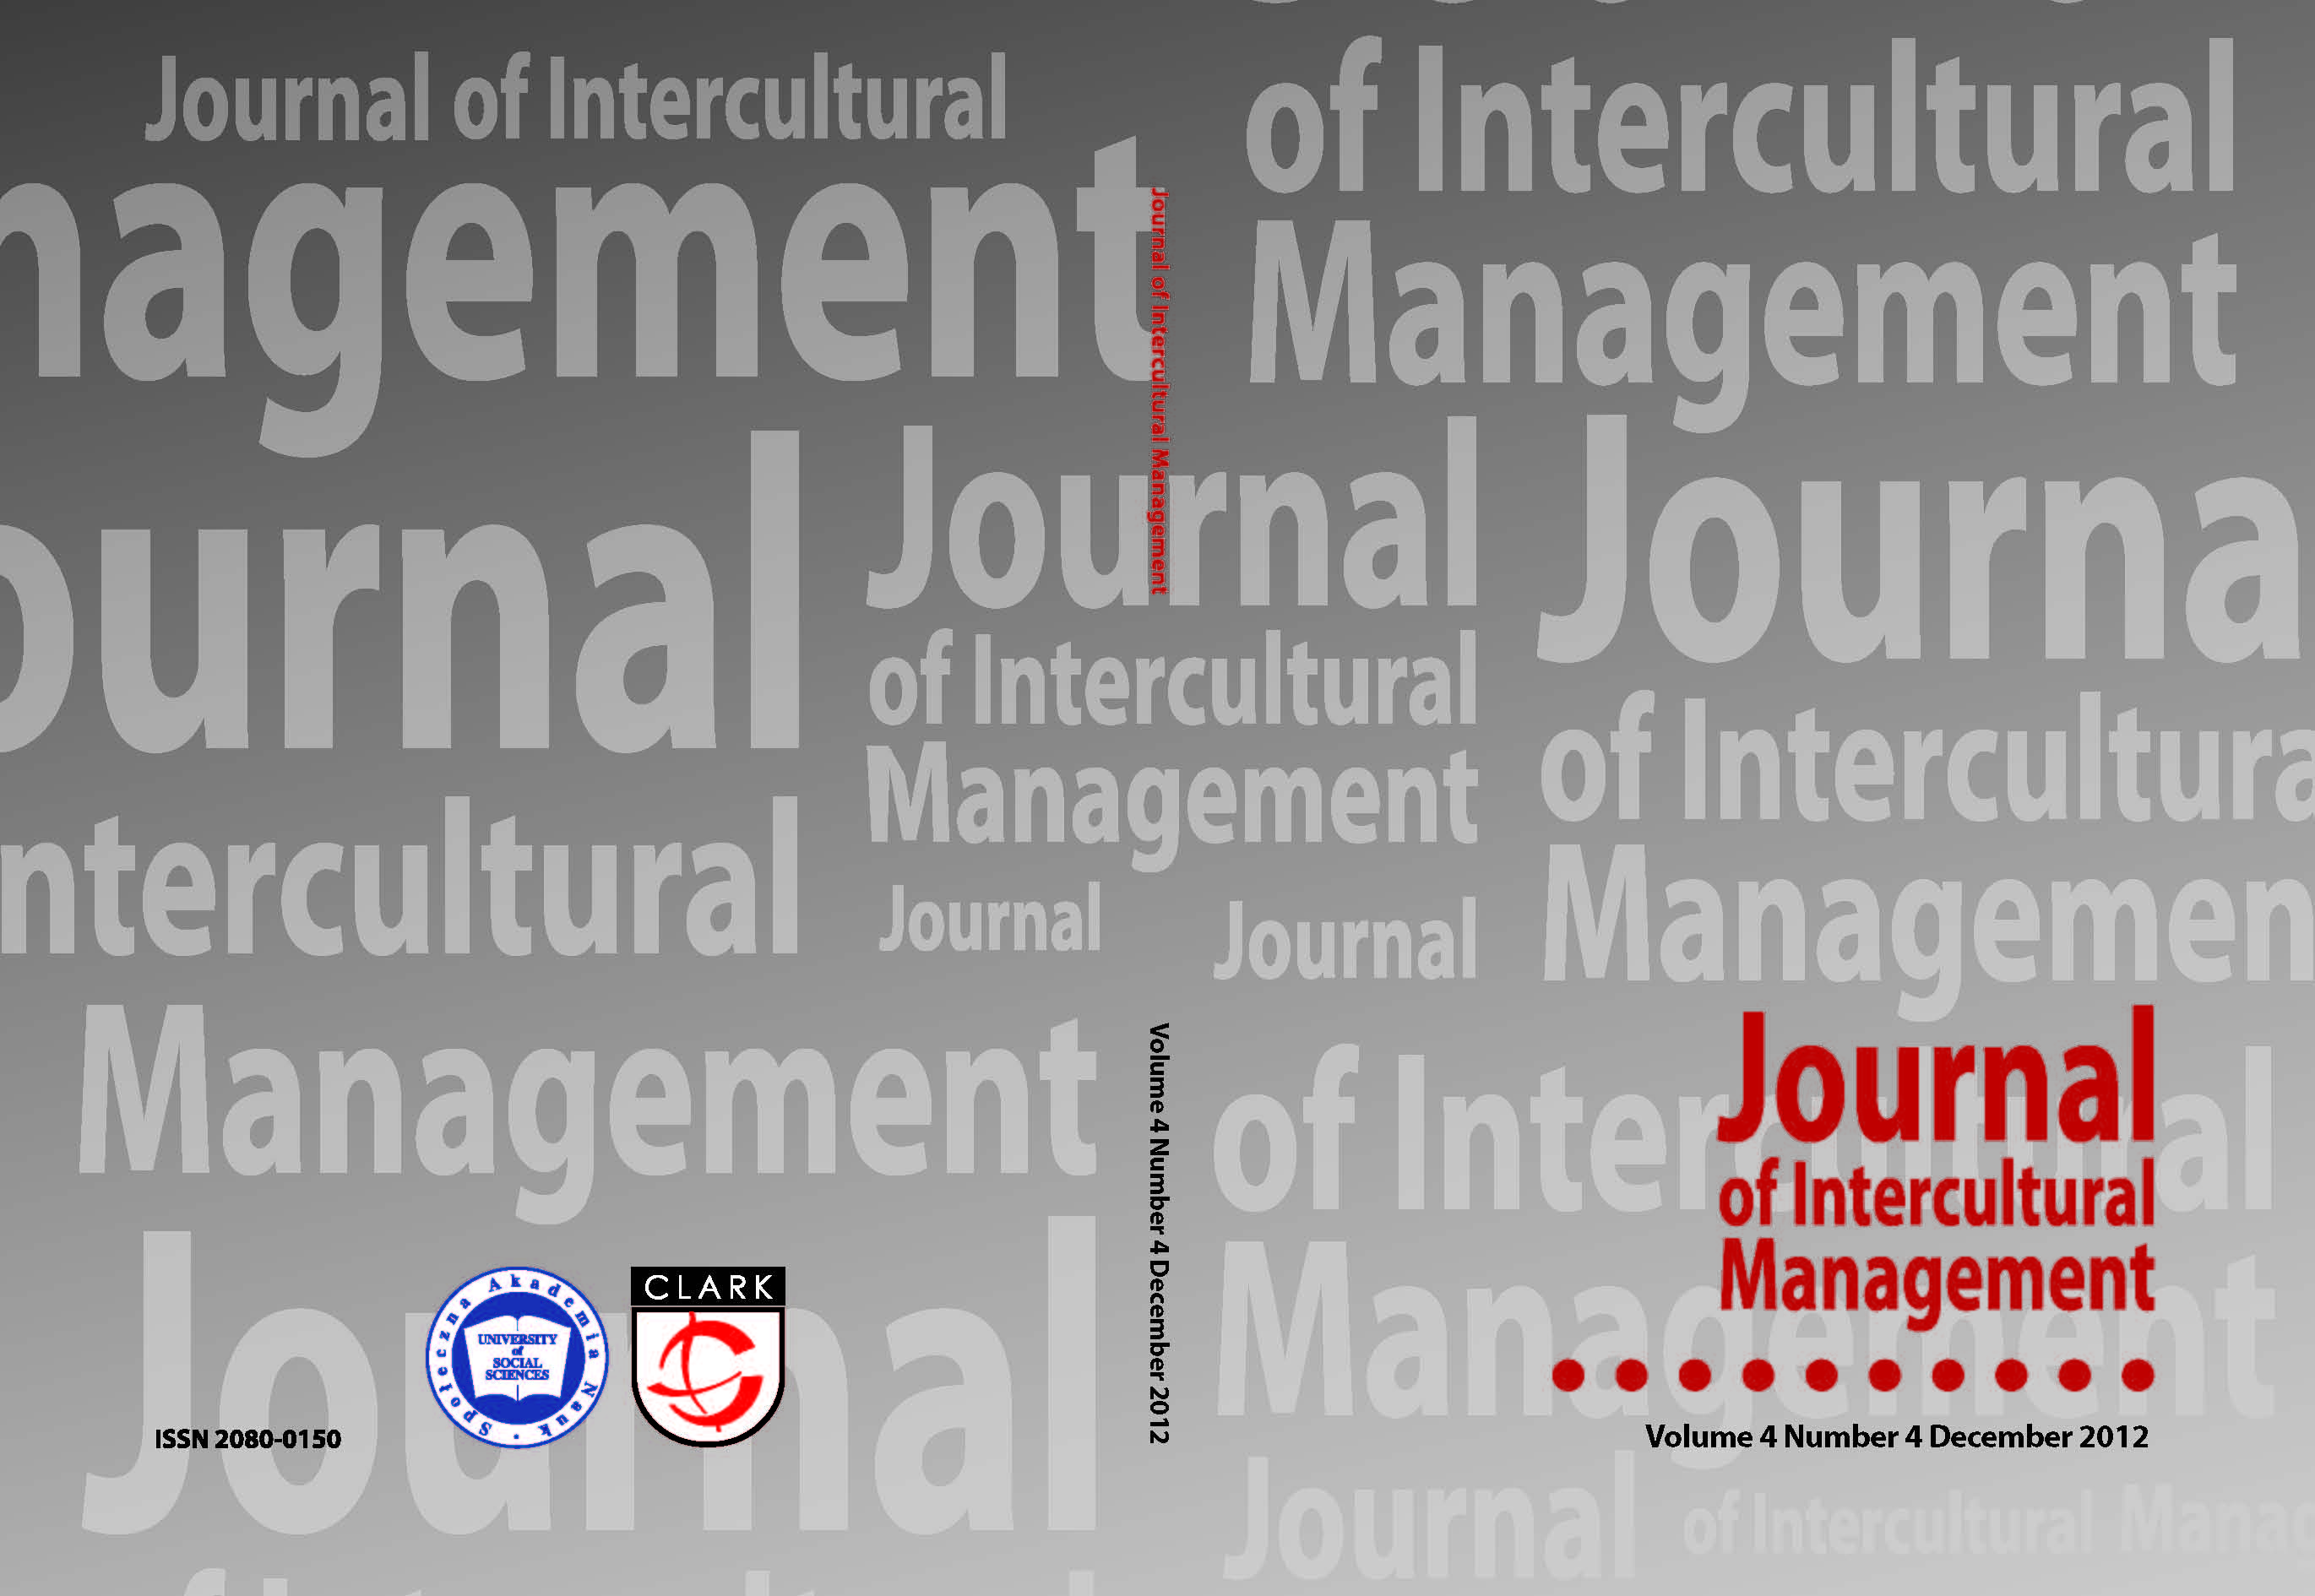 Intercultural	education from the organizational point	of	view Cover Image